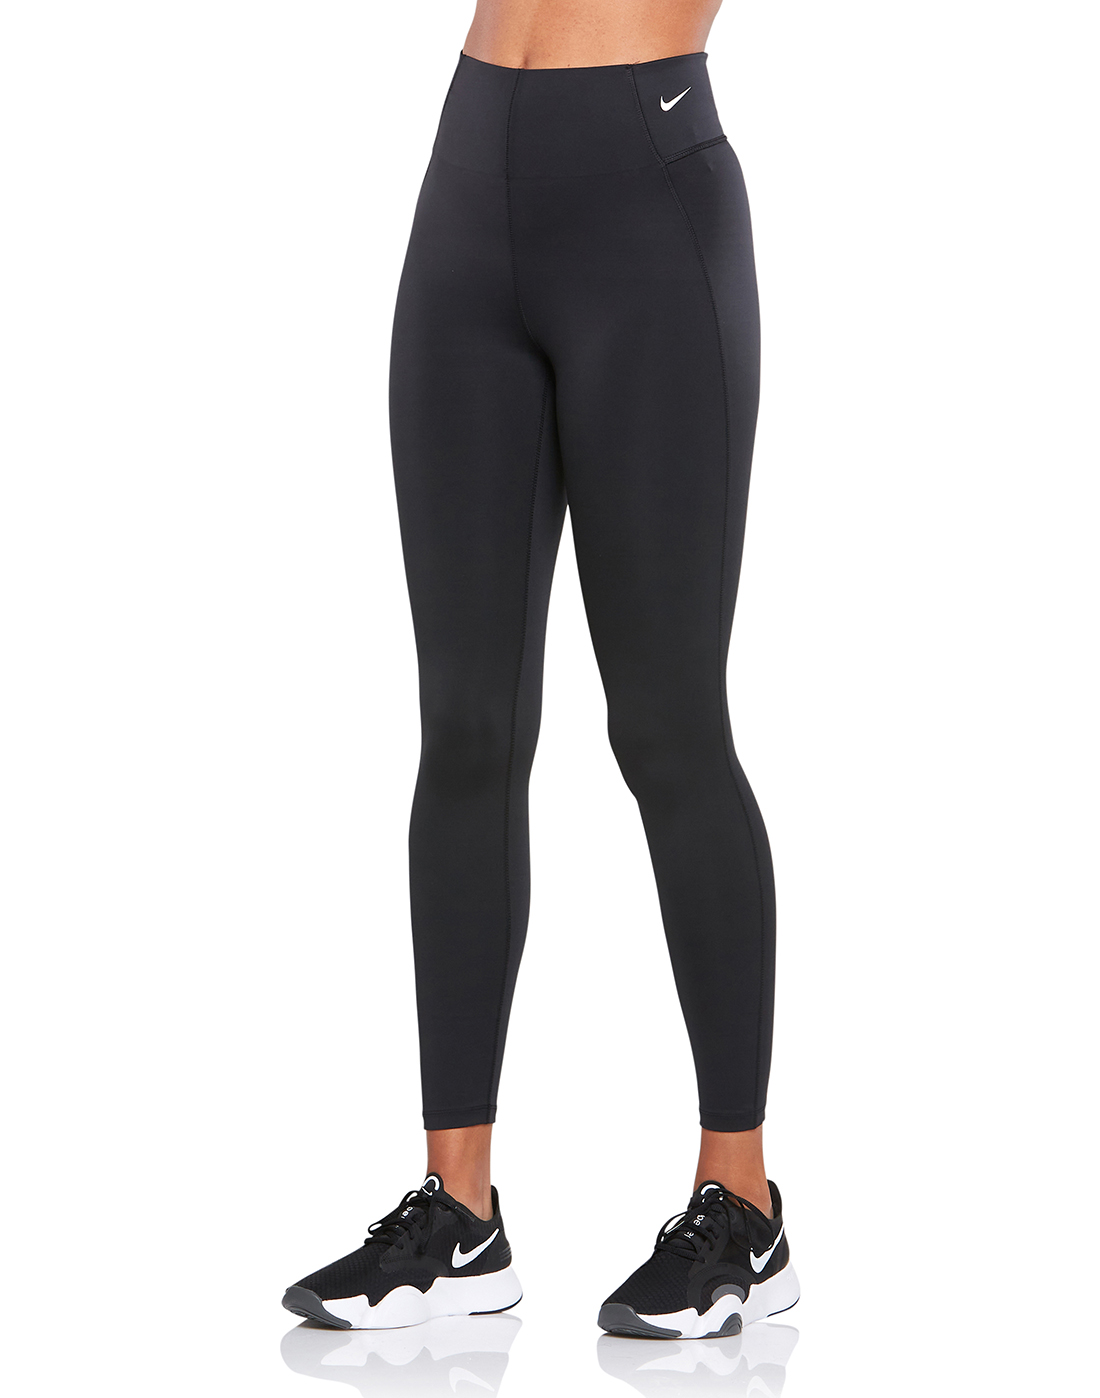 Nike Victory Tights | Life Style Sports